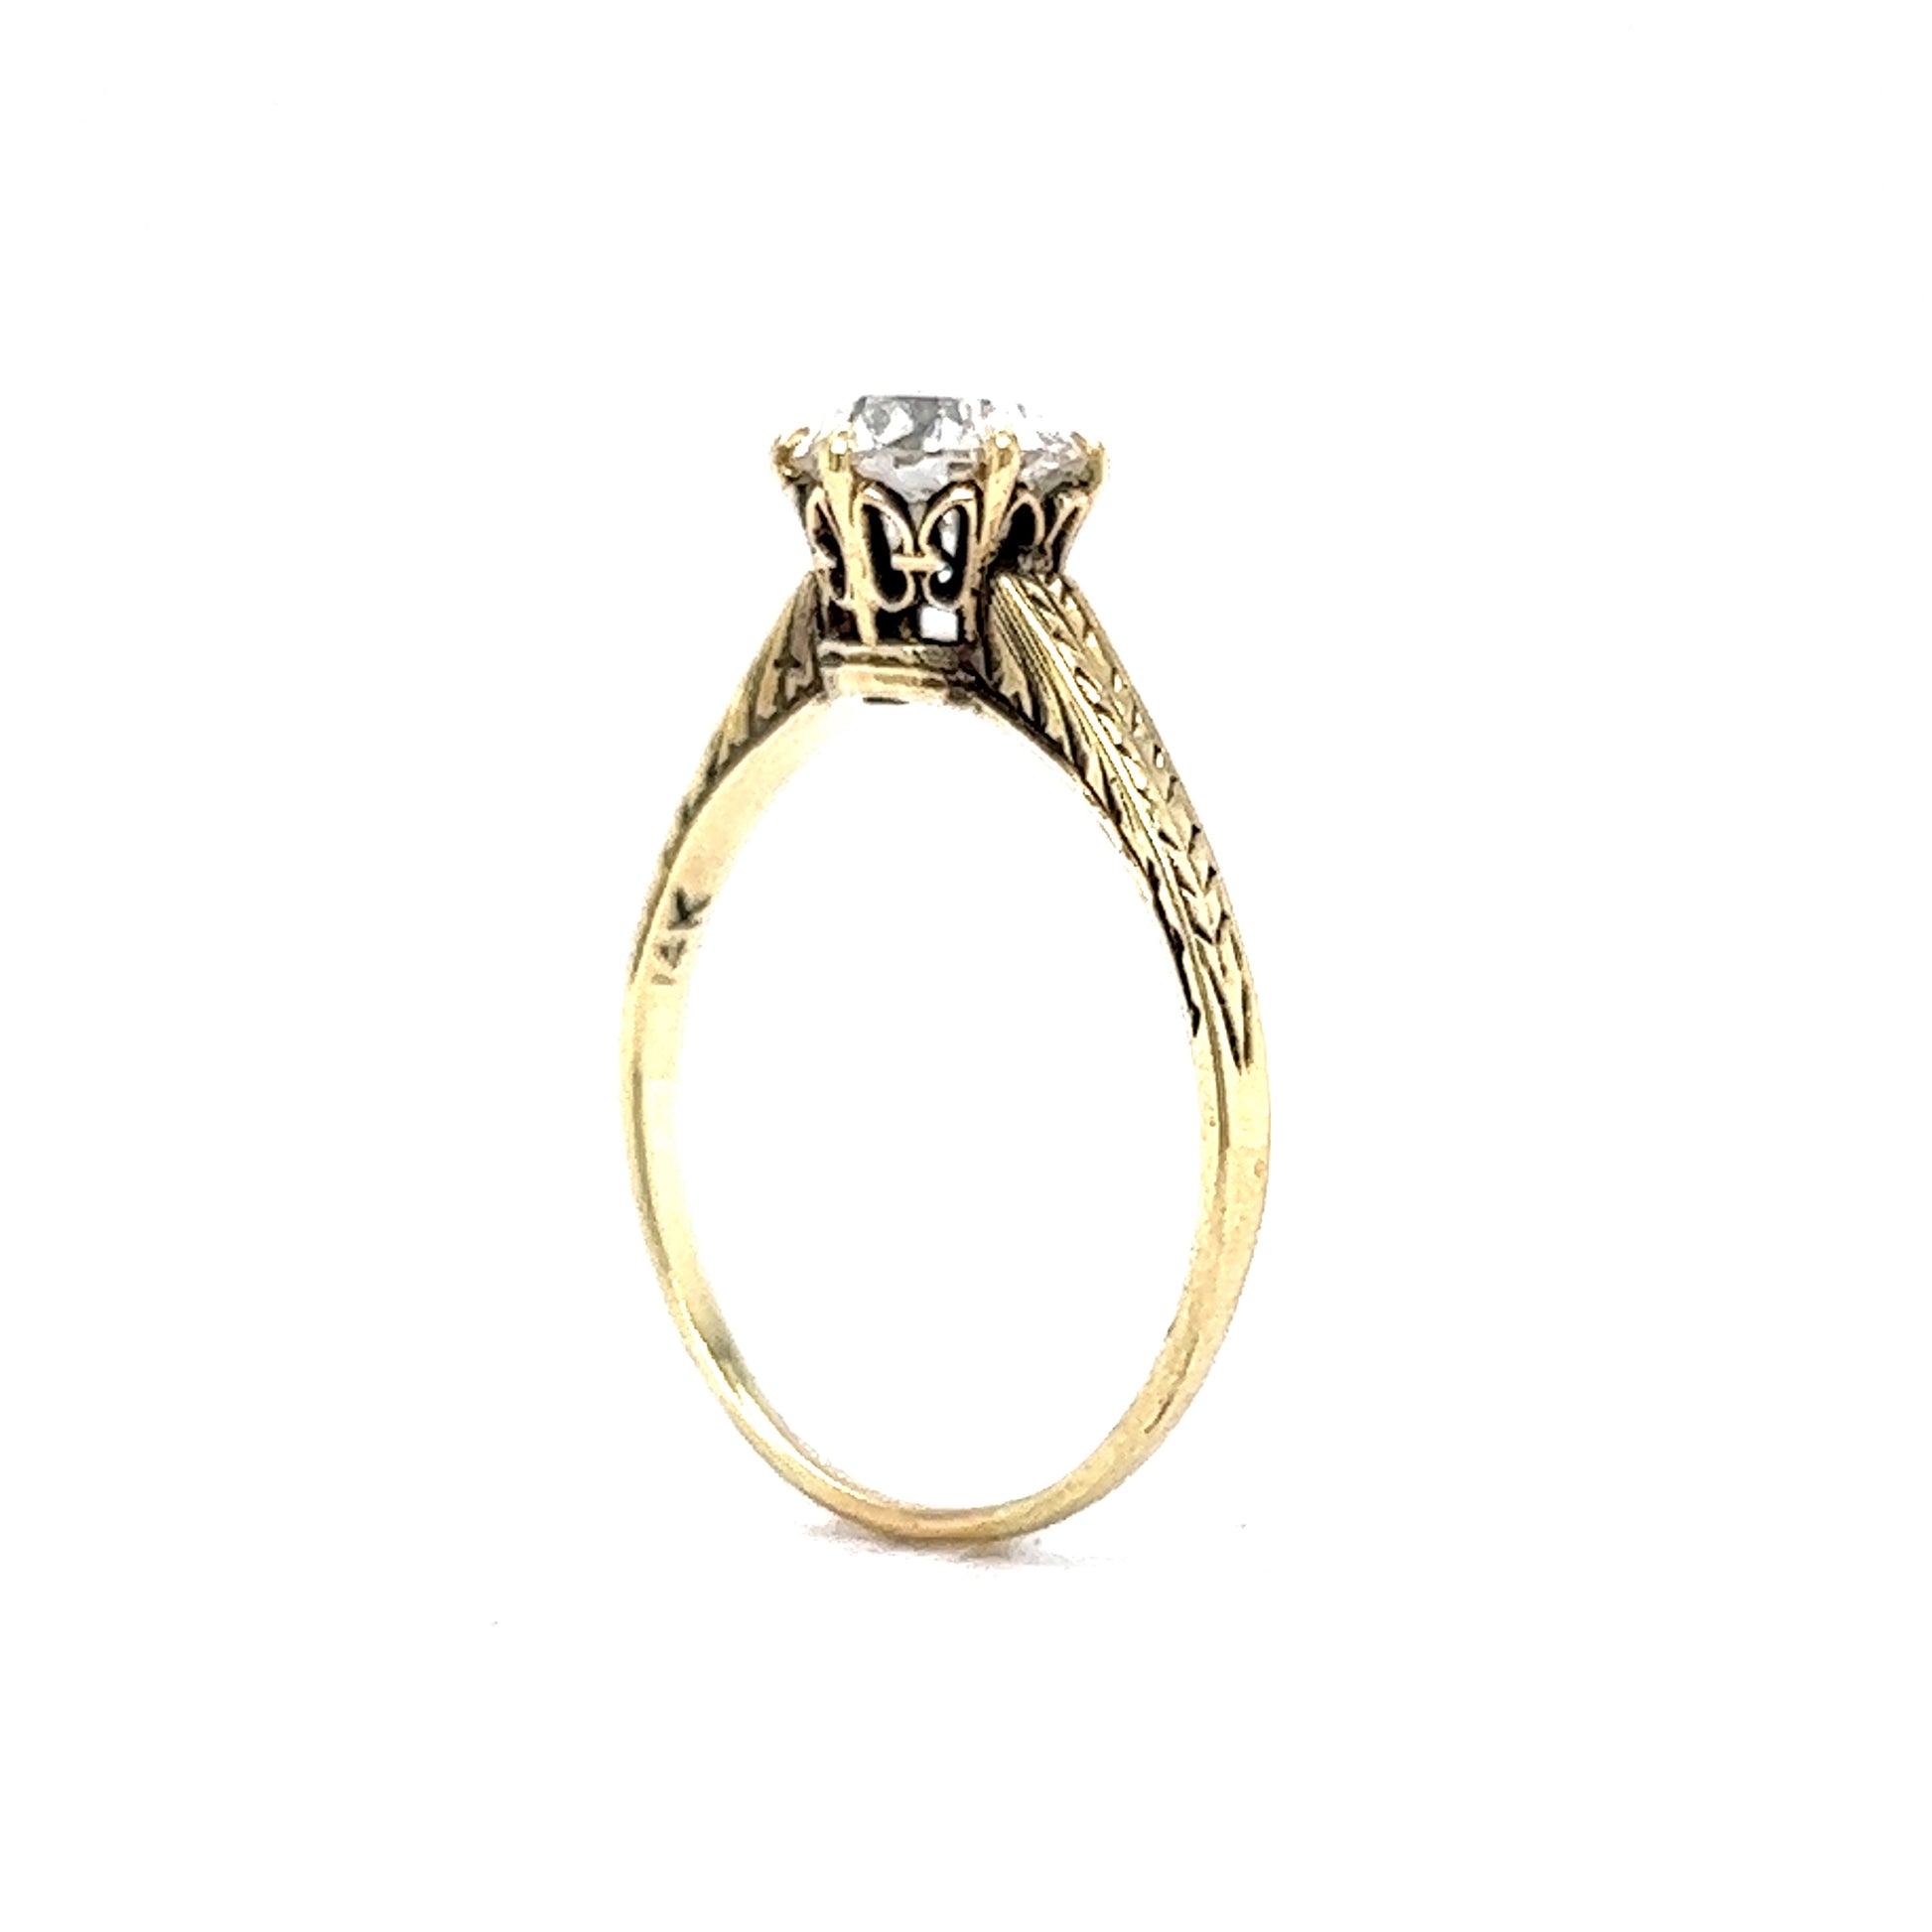 1.02 Victorian Diamond Engagement Ring in 14k Yellow GoldComposition: 14 Karat Yellow GoldRing Size: 6.5Total Diamond Weight: 1.02 ctTotal Gram Weight: 1.9 gInscription: 14K